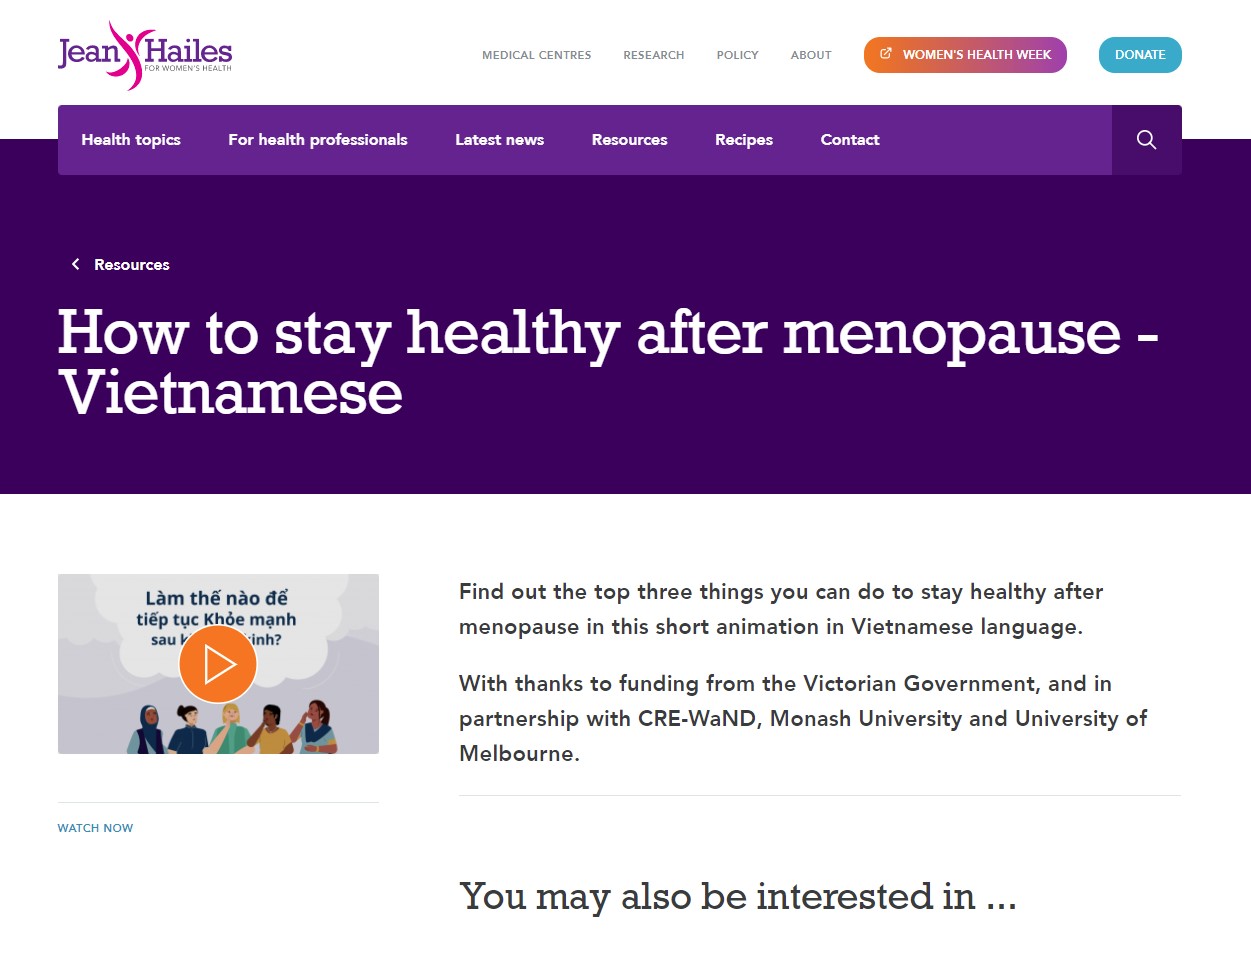 Jean Hailes - How to stay healthy after menopause (Vietnamese) thumbnail